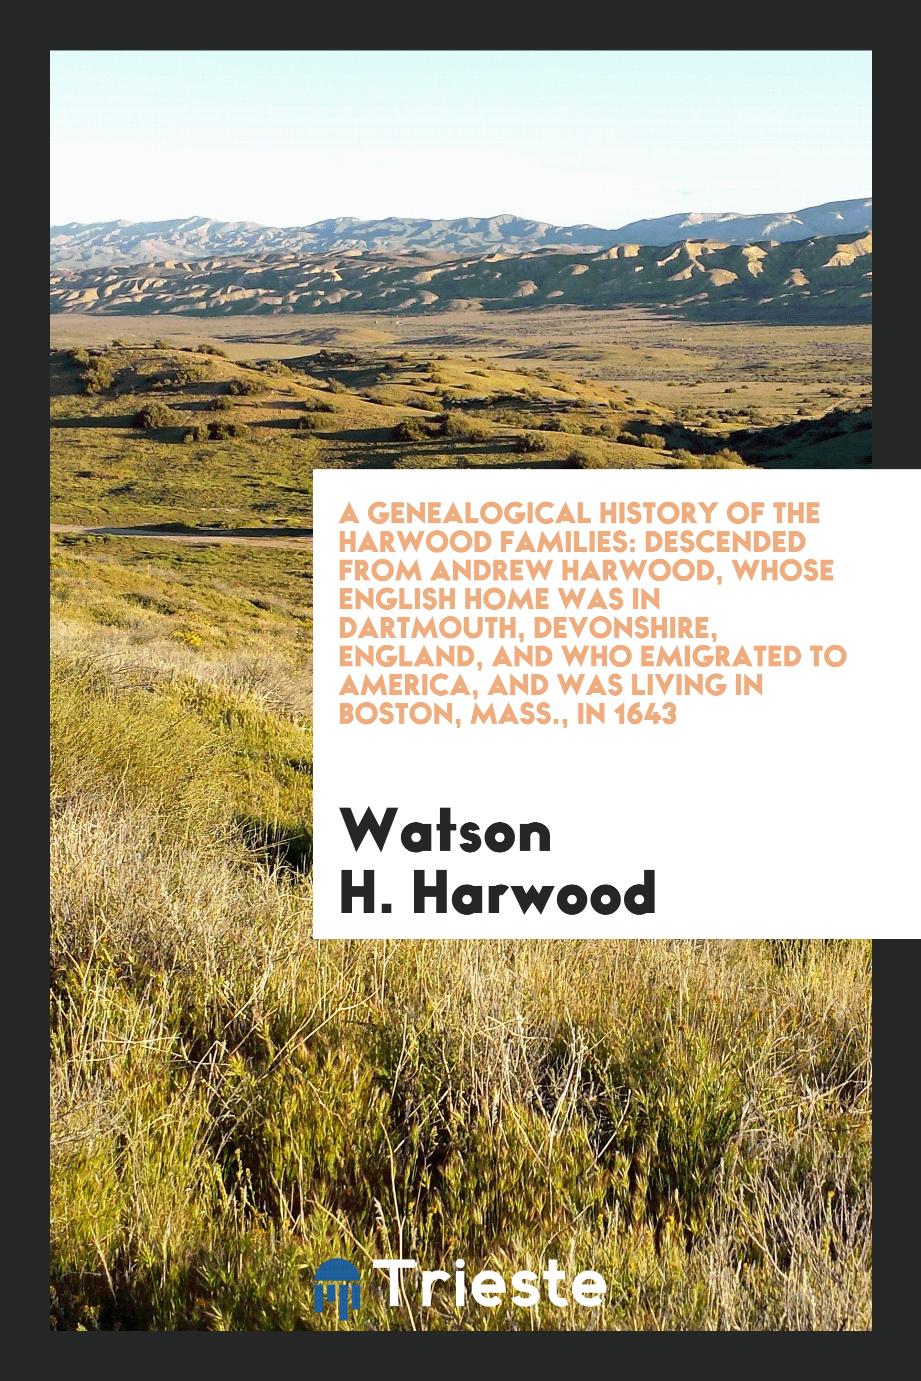 A Genealogical History of the Harwood Families: Descended from Andrew Harwood, Whose English Home Was in Dartmouth, Devonshire, England, and Who Emigrated to America, and Was Living in Boston, Mass., in 1643